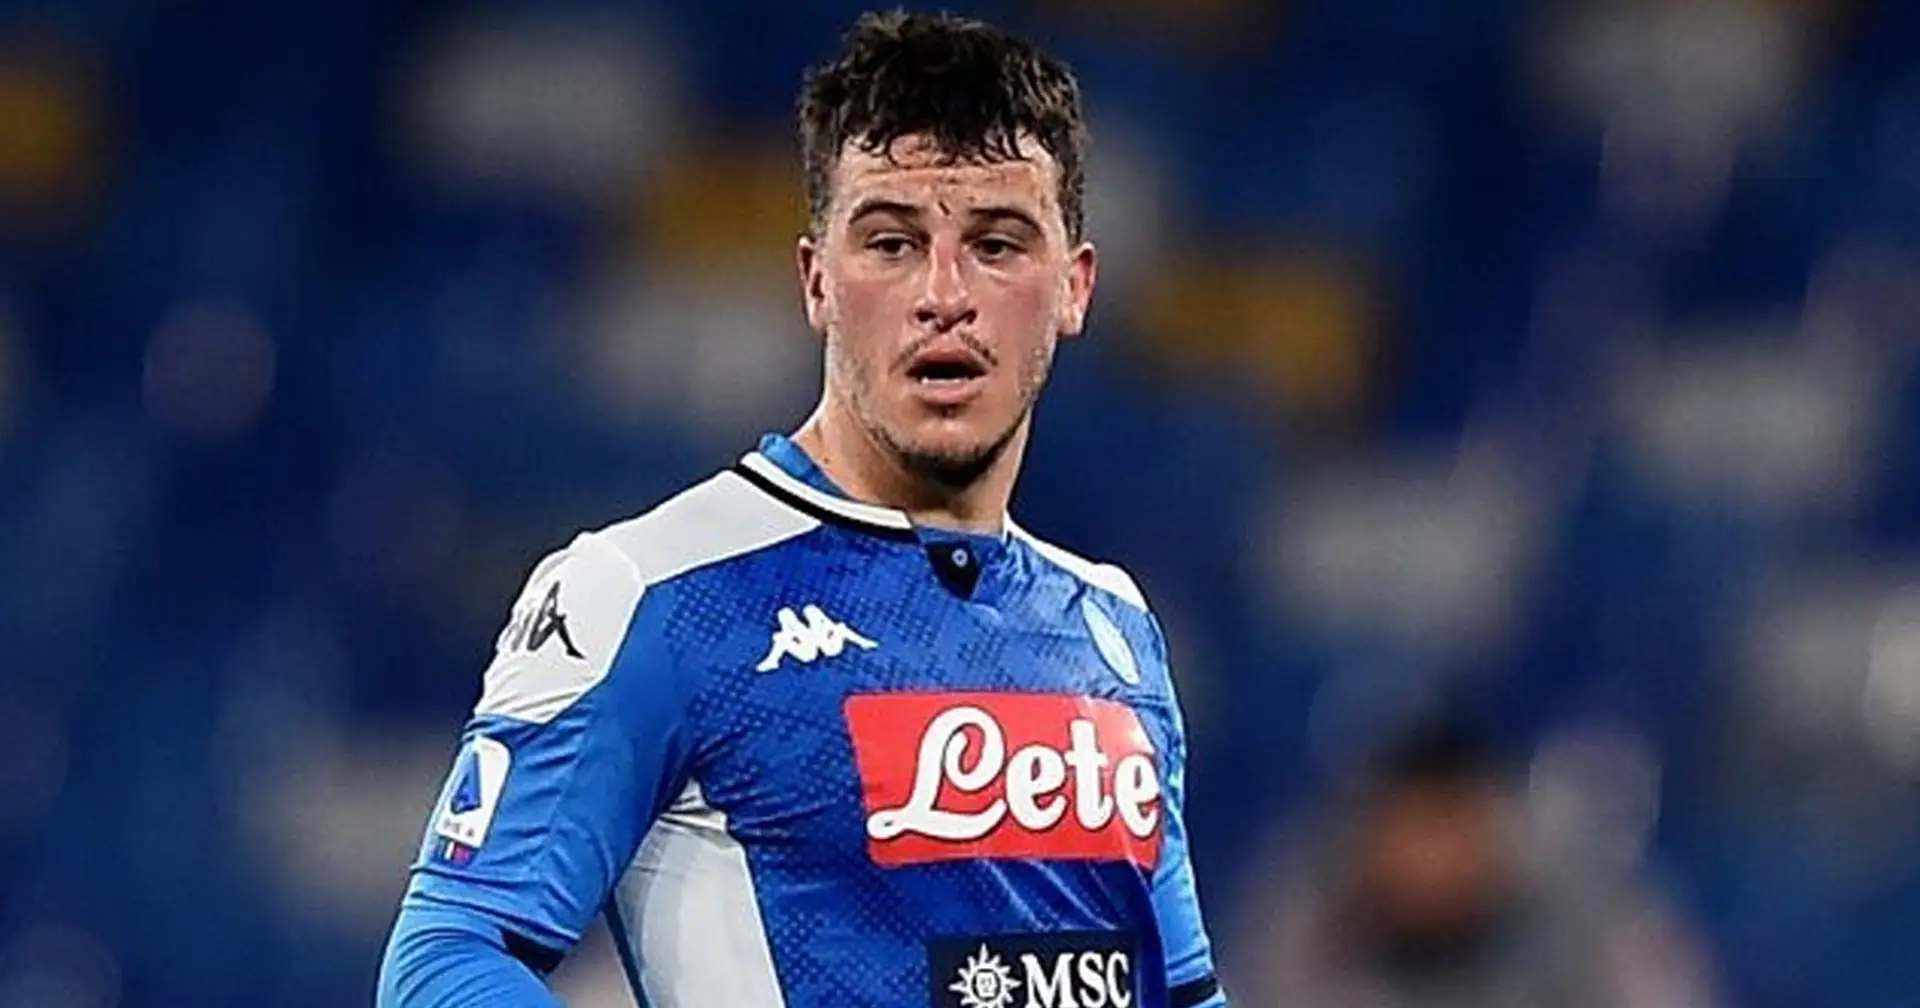 Napoli midfielder Diego Demme: 'We know we can challenge a big club as strong as Barca'